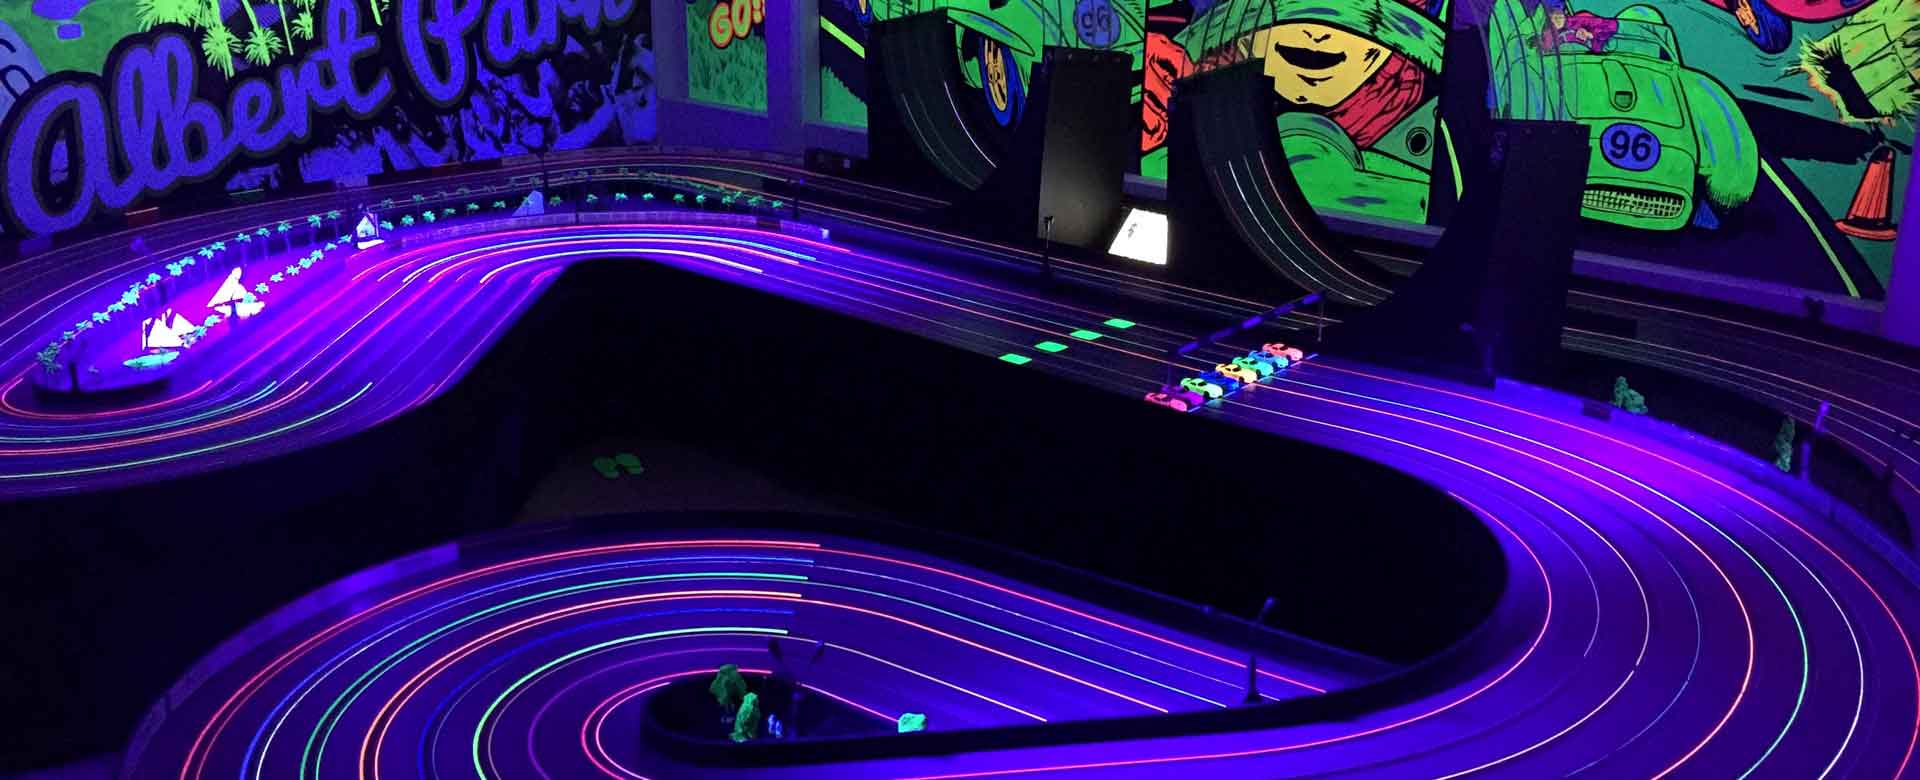  Fluro slot car racing for all!   Book Now  